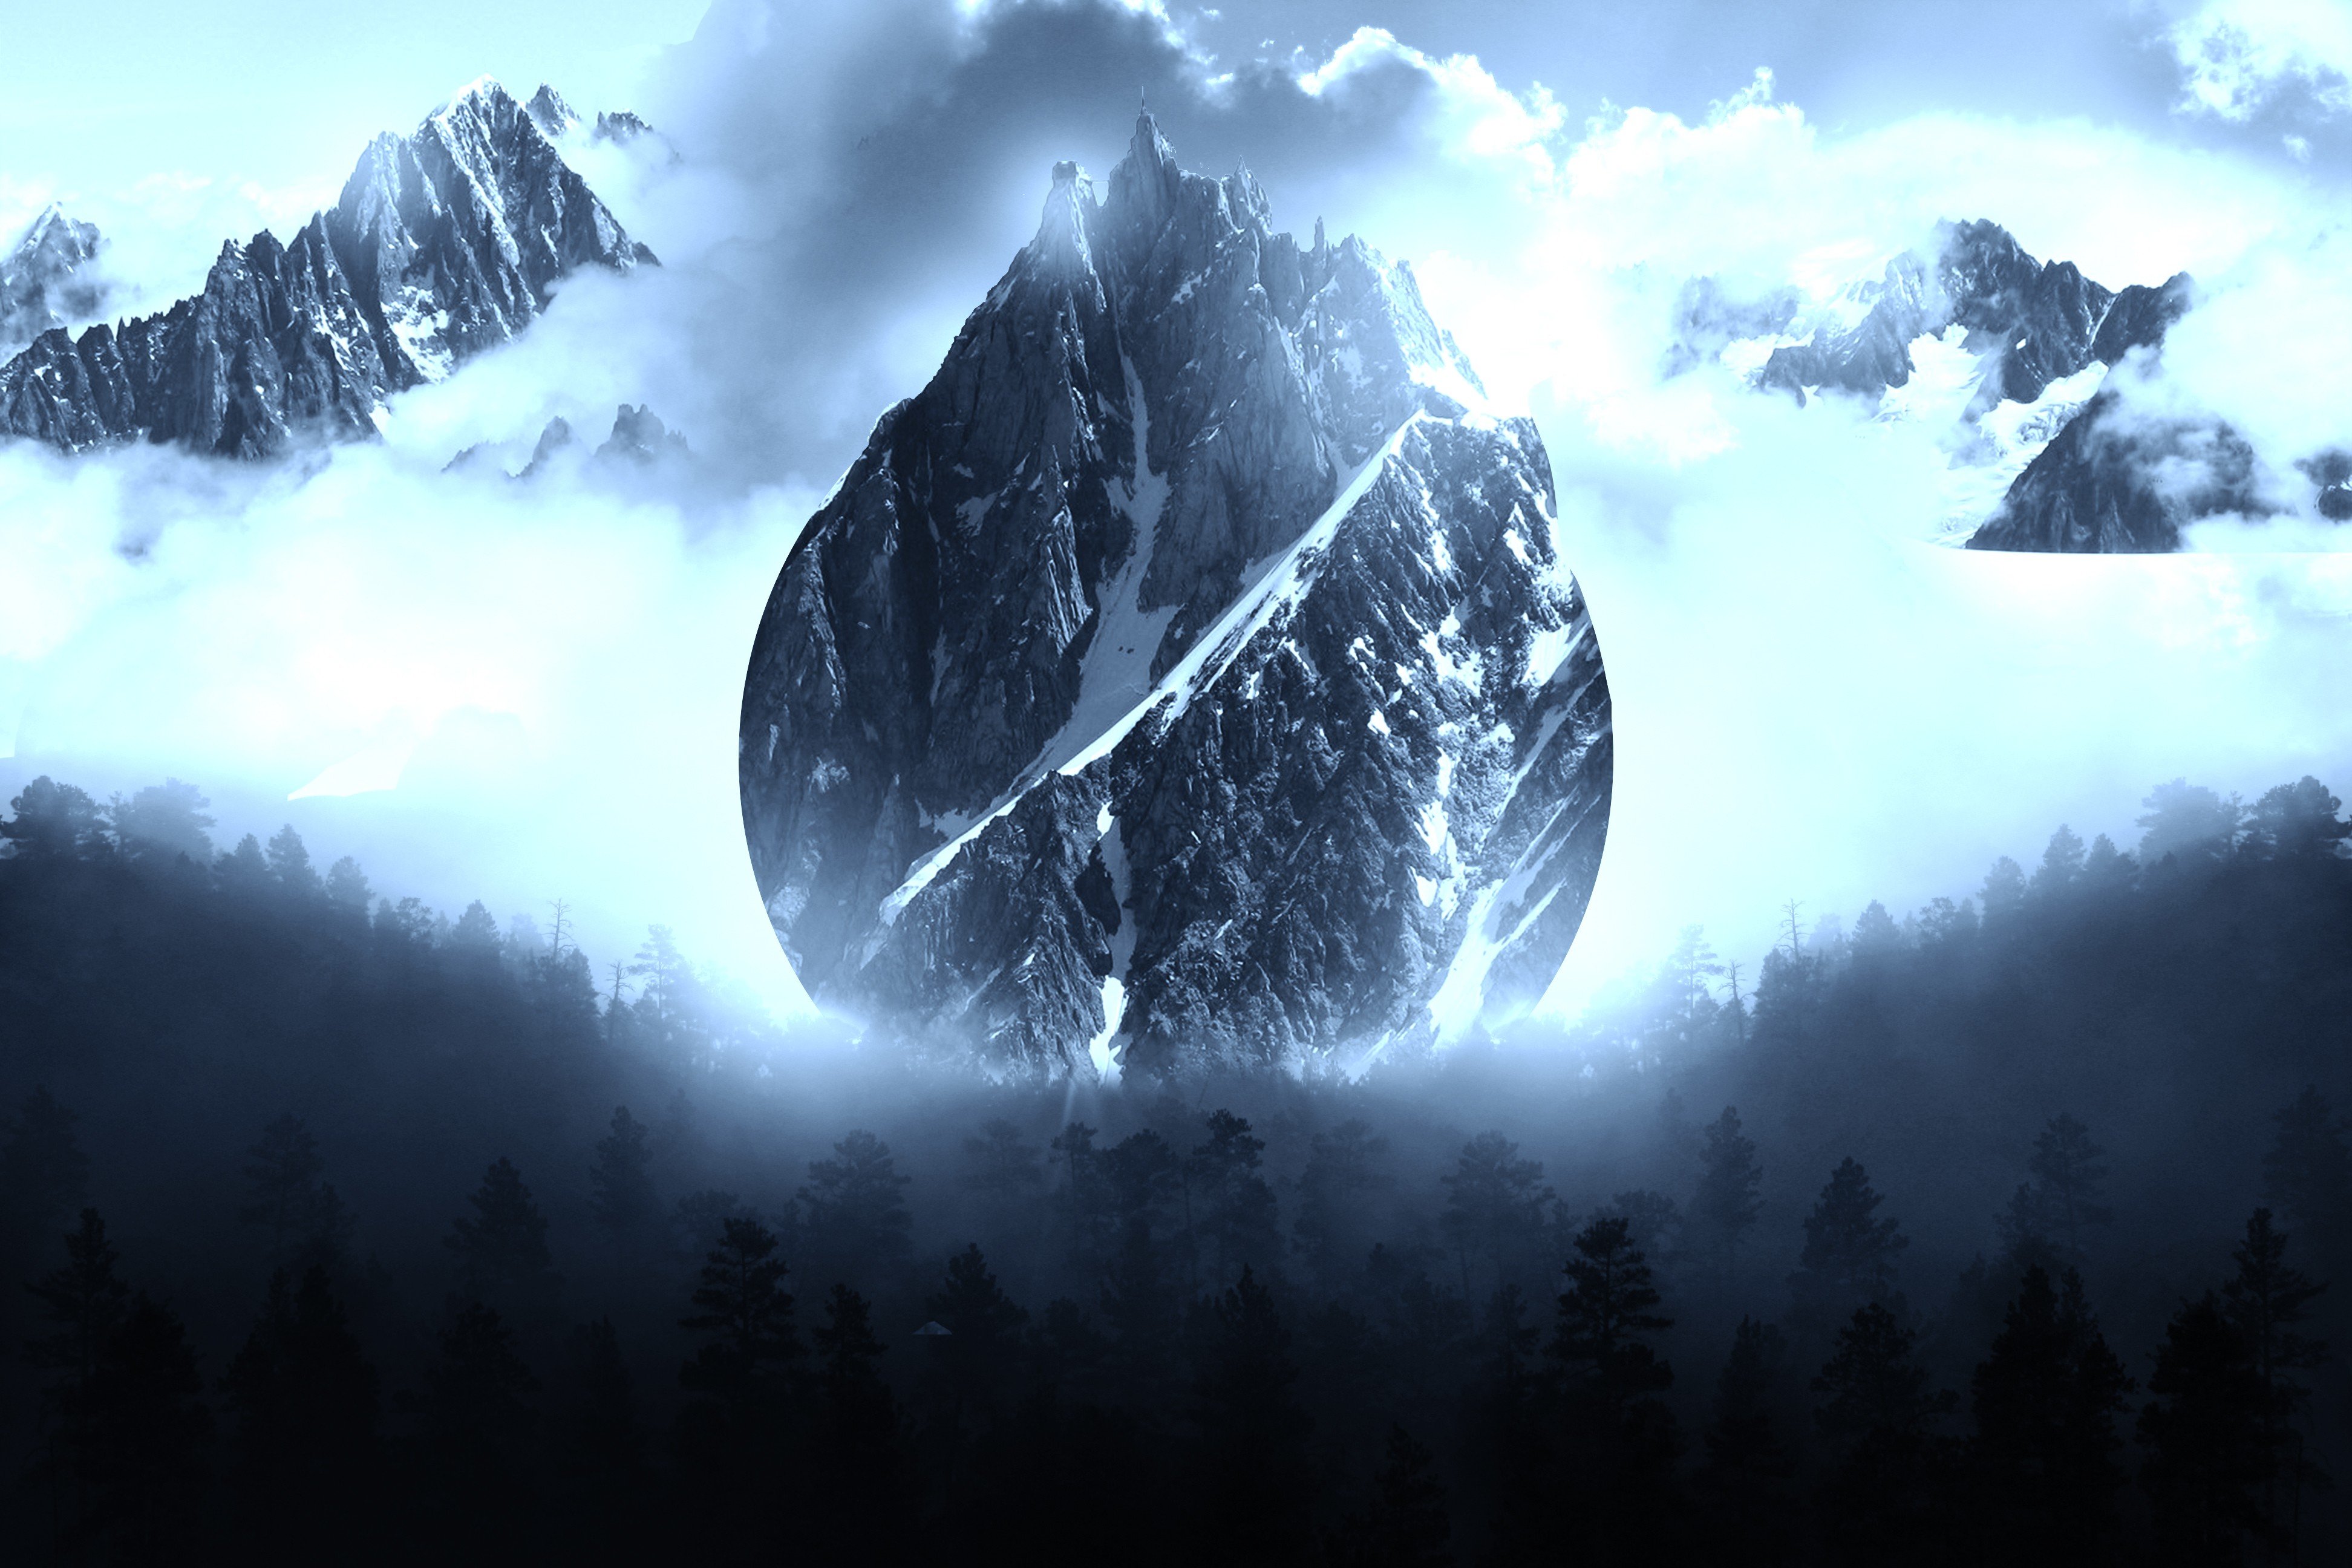 photography, Photo manipulation, Mountains, Clouds, Landscape, Tree house Wallpaper